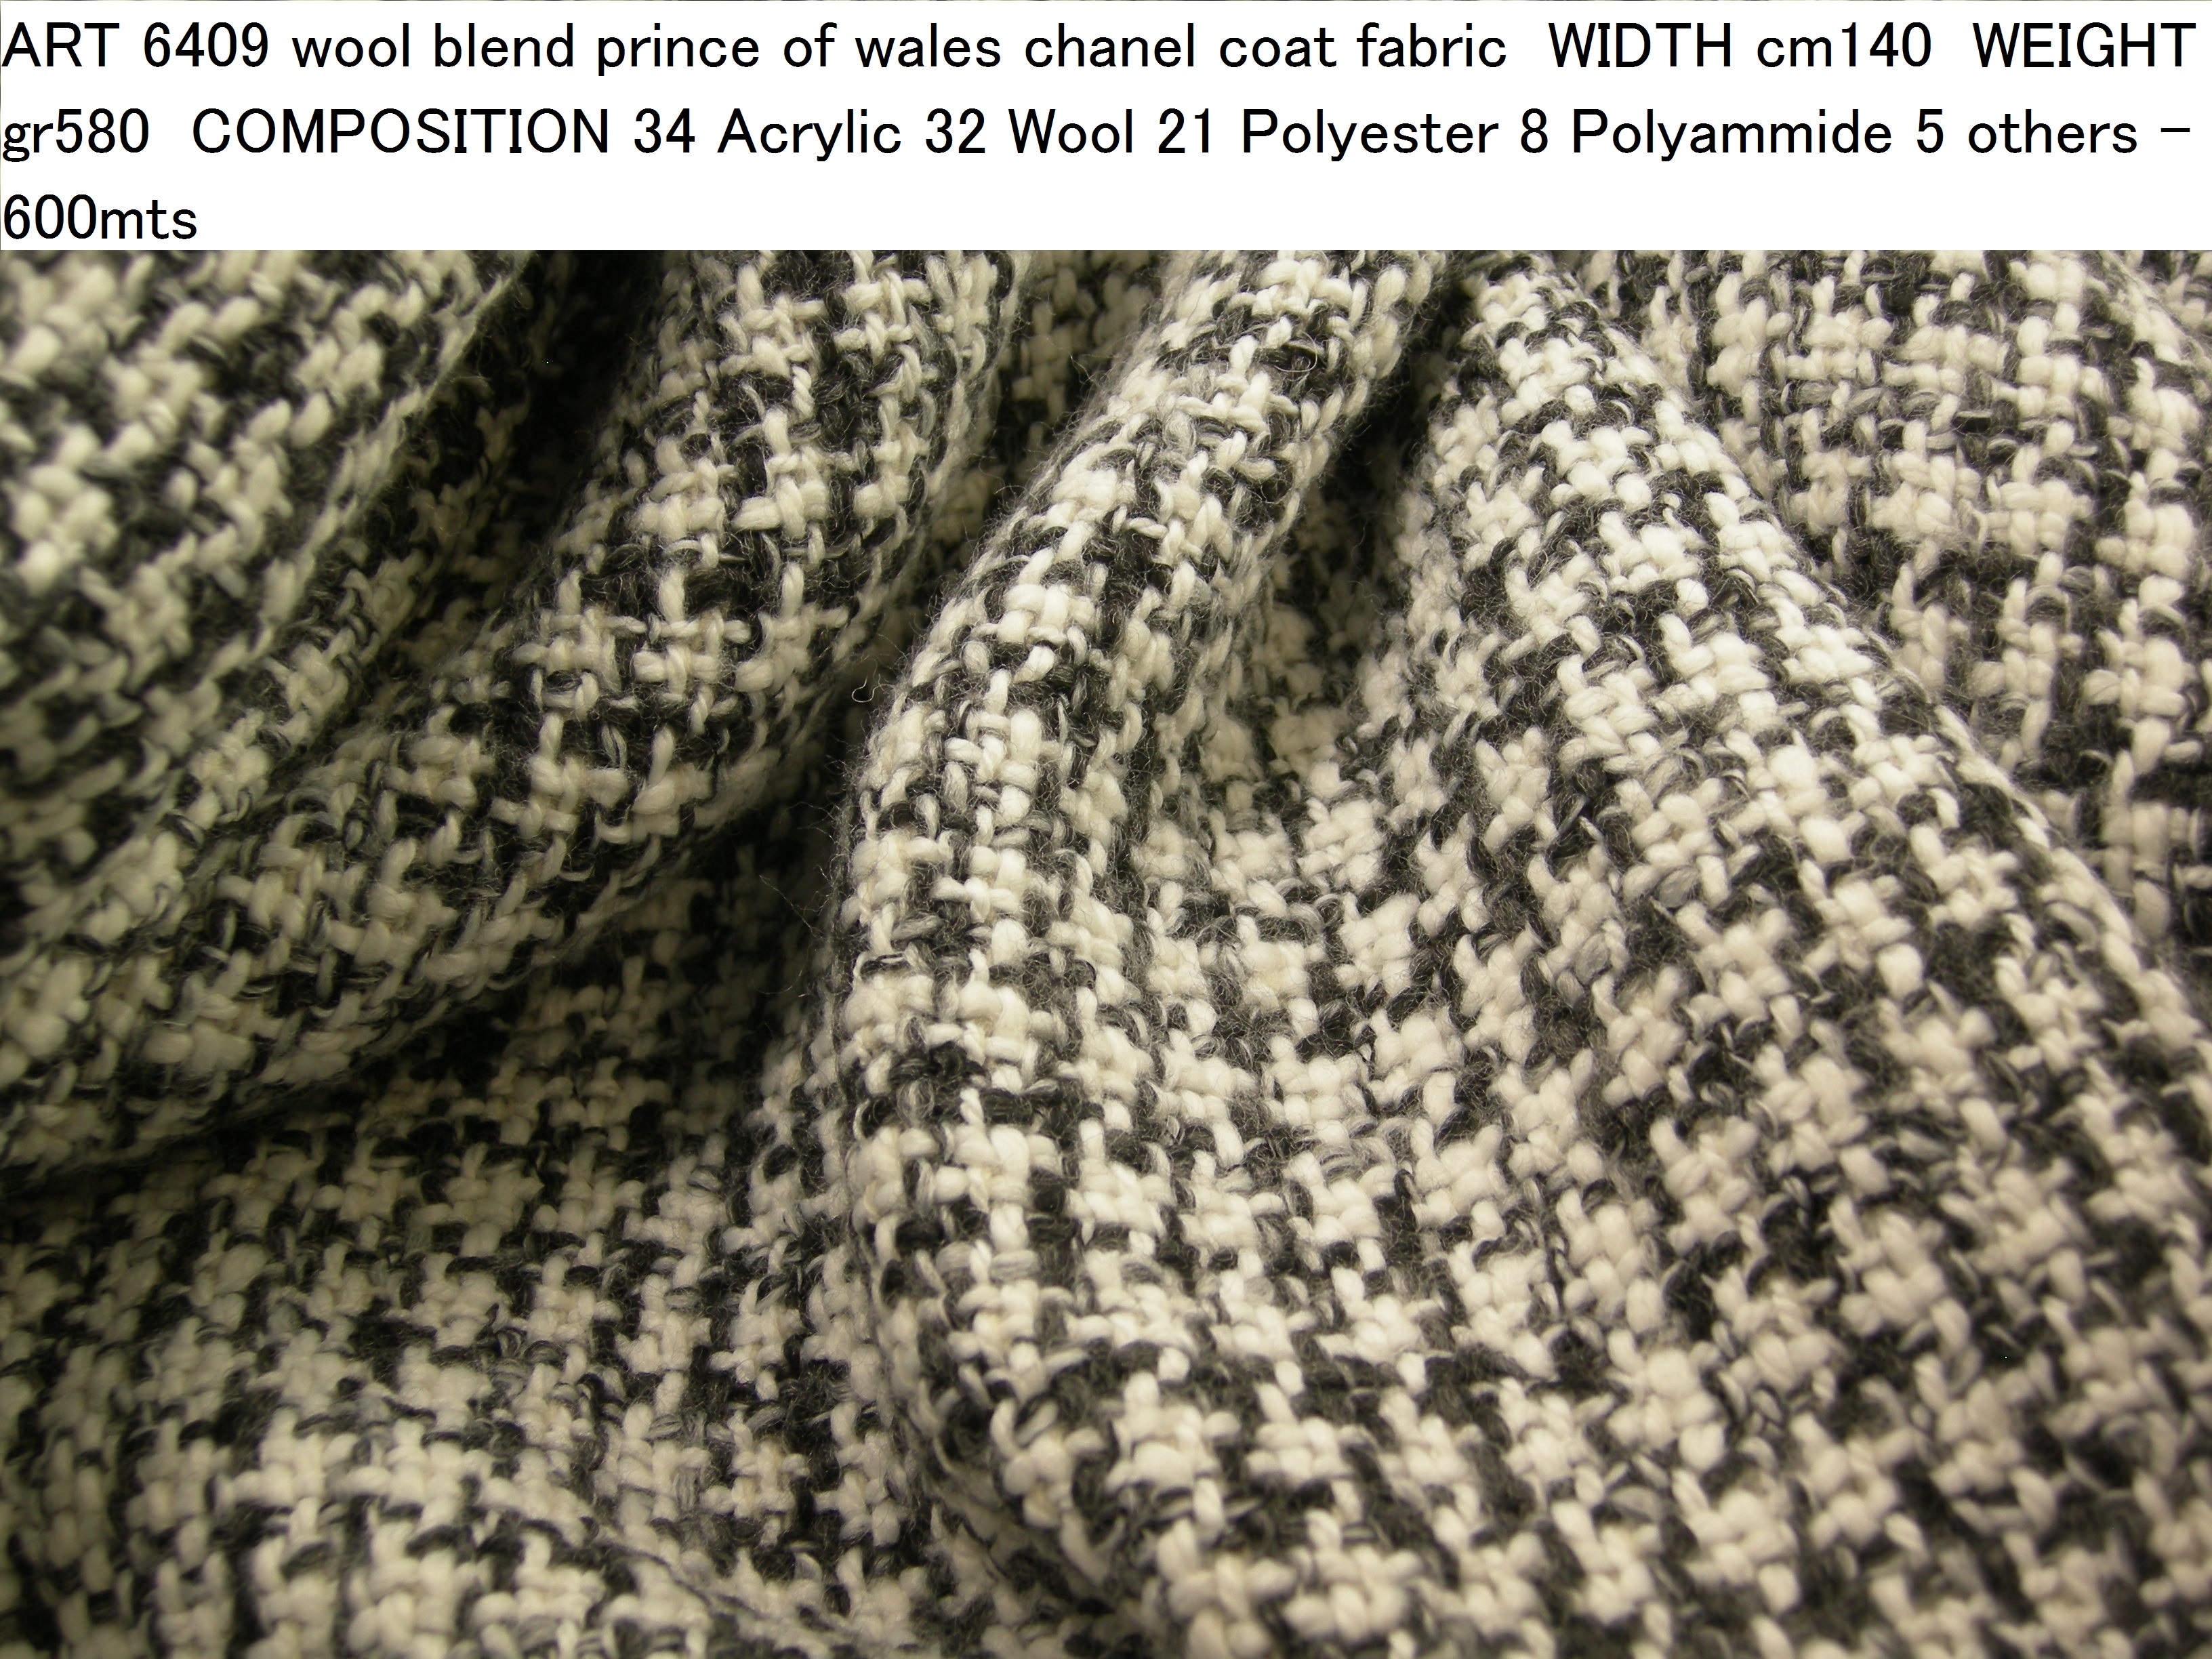 ART 6409 wool blend prince of wales chanel coat fabric WIDTH cm140 WEIGHT gr580 COMPOSITION 34 Acrylic 32 Wool 21 Polyester 8 Polyammide 5 others - 600mts